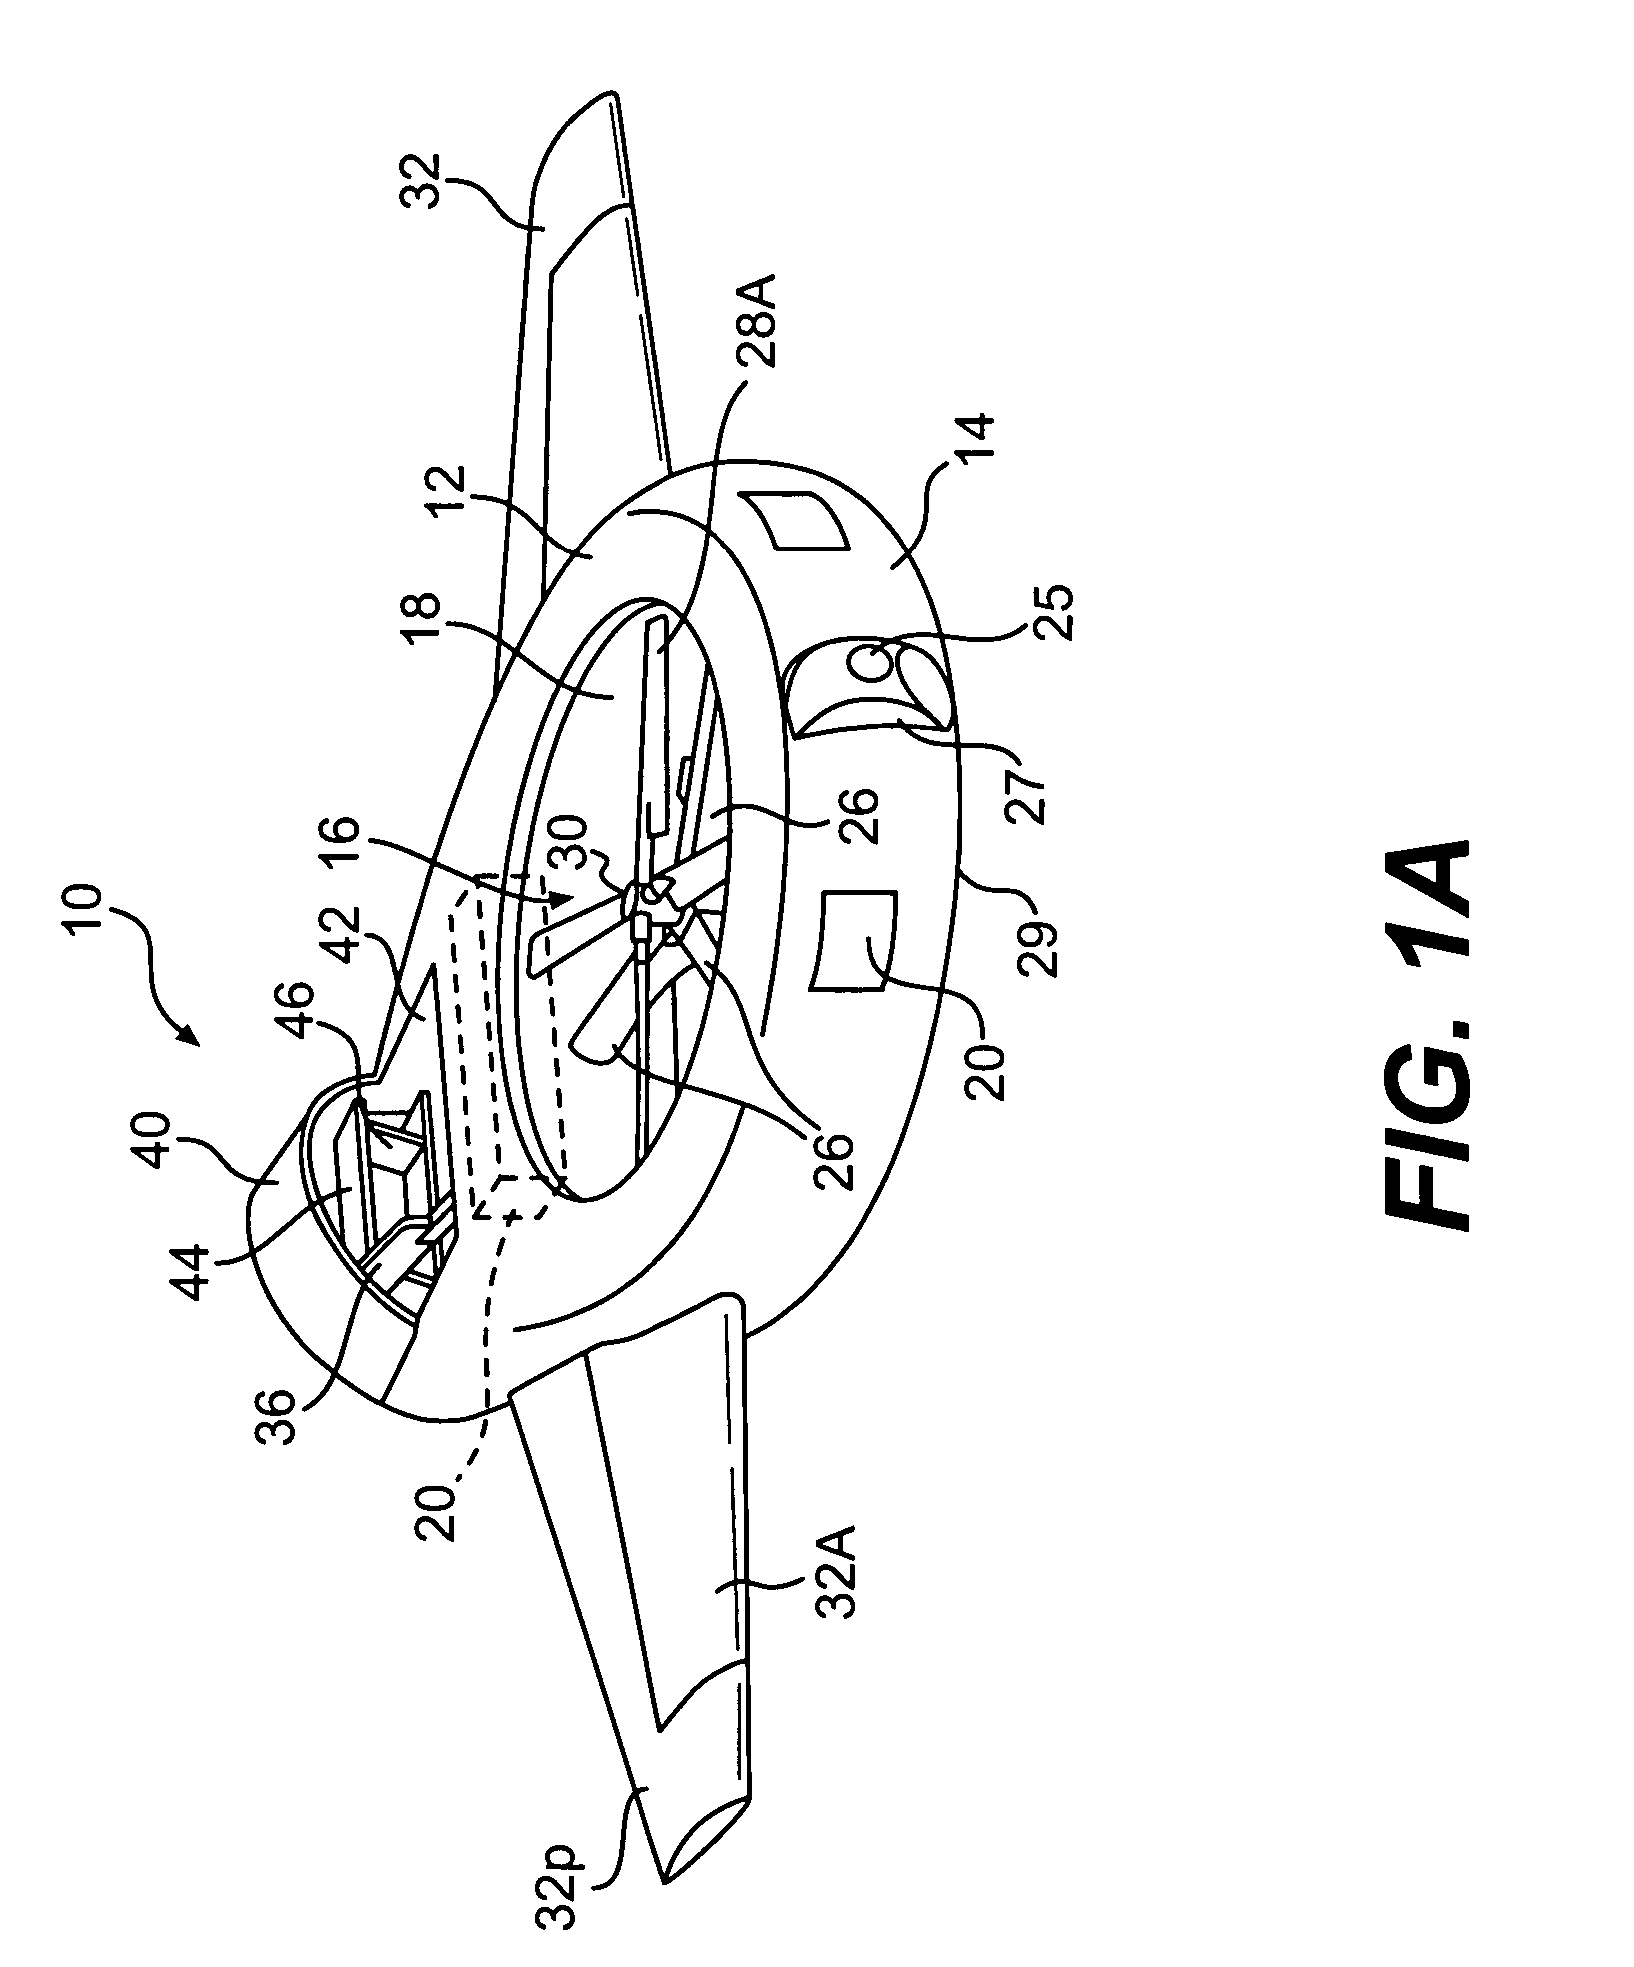 Swashplate and pitch link arrangement for a coaxial counter rotating rotor system